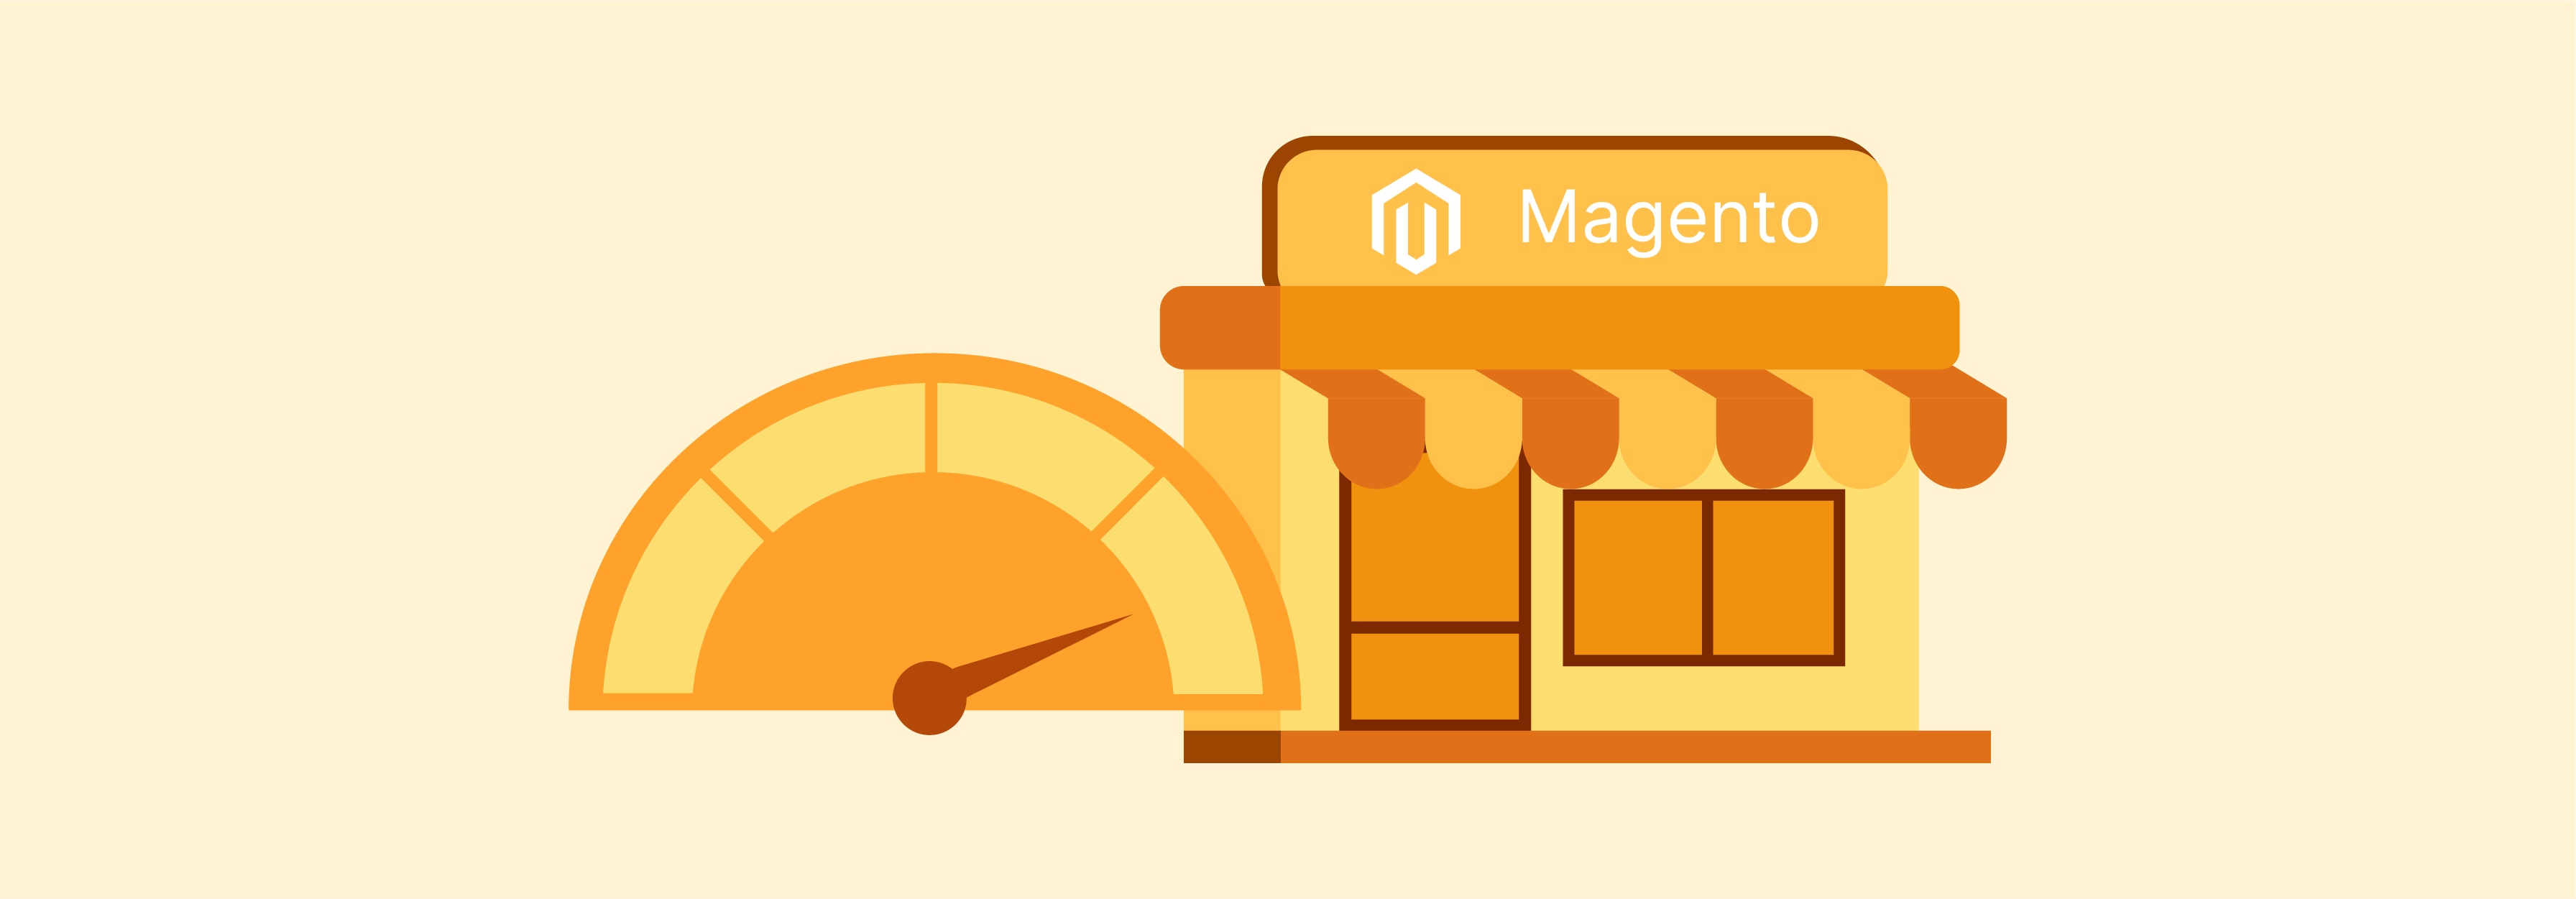 Performance optimization techniques for Magento hosting in Toronto ensuring fast loading times
